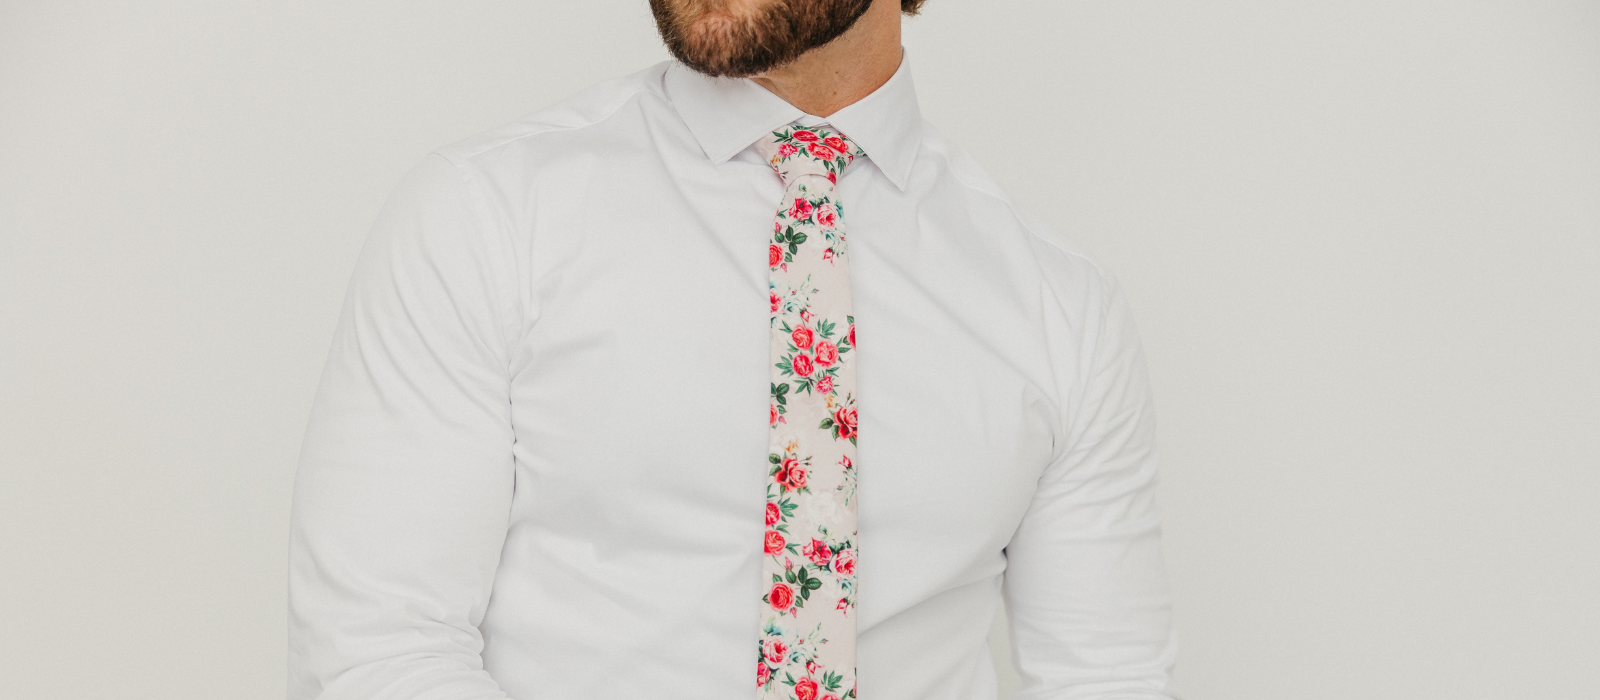 Picture of a man wearing a white long sleeve dress shirt and a colorful floral necktie called "Rose Garden".